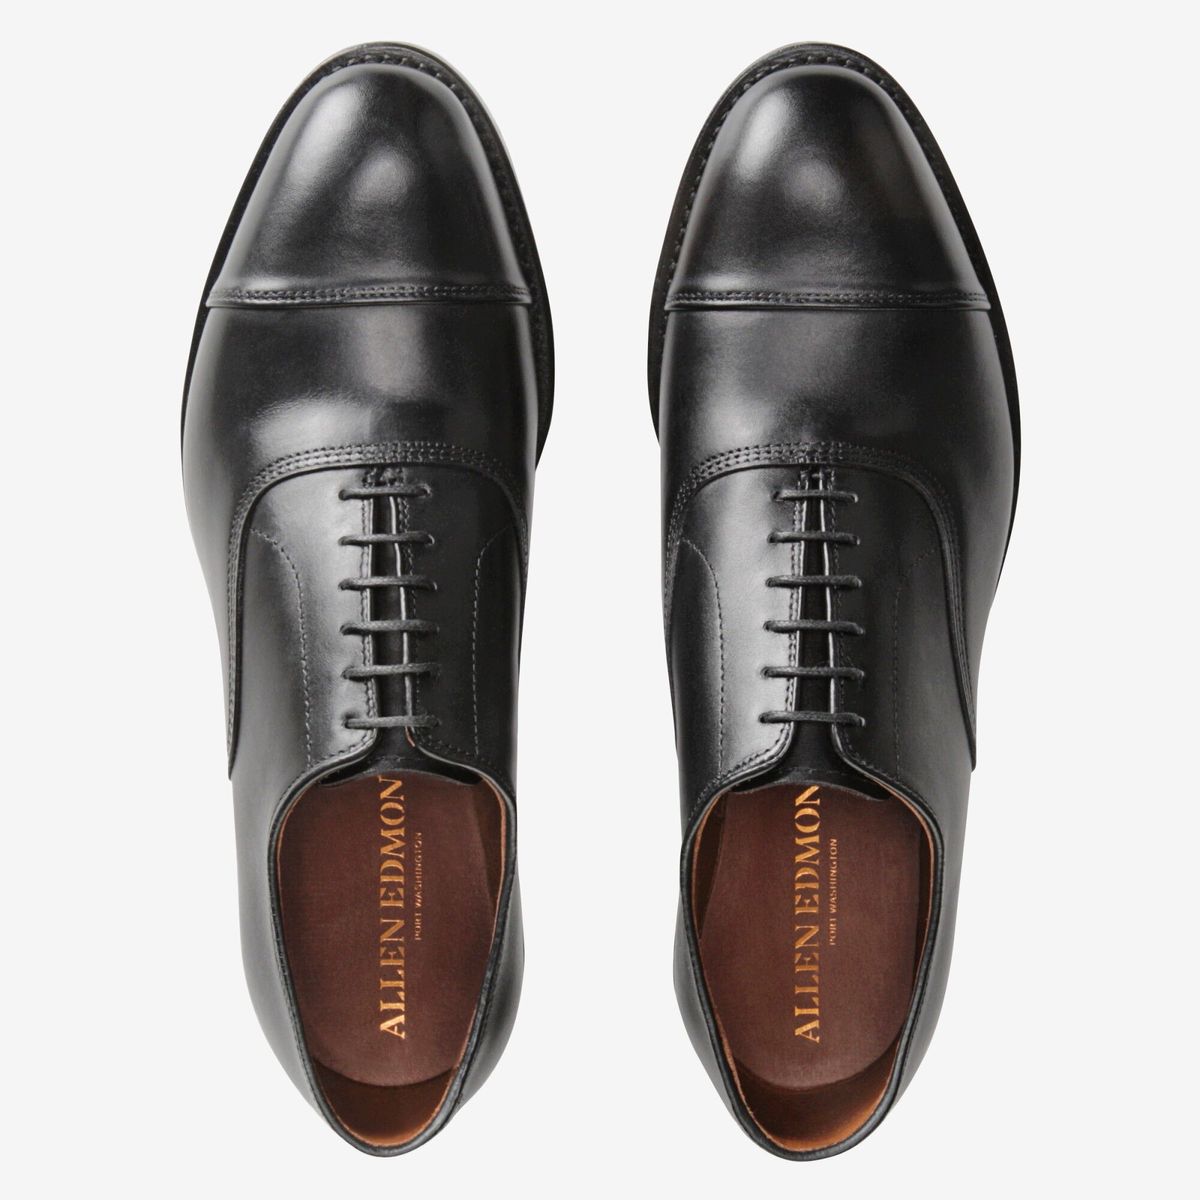 A Glossary of Dress Shoe Styles—Names, Photos, and Descriptions